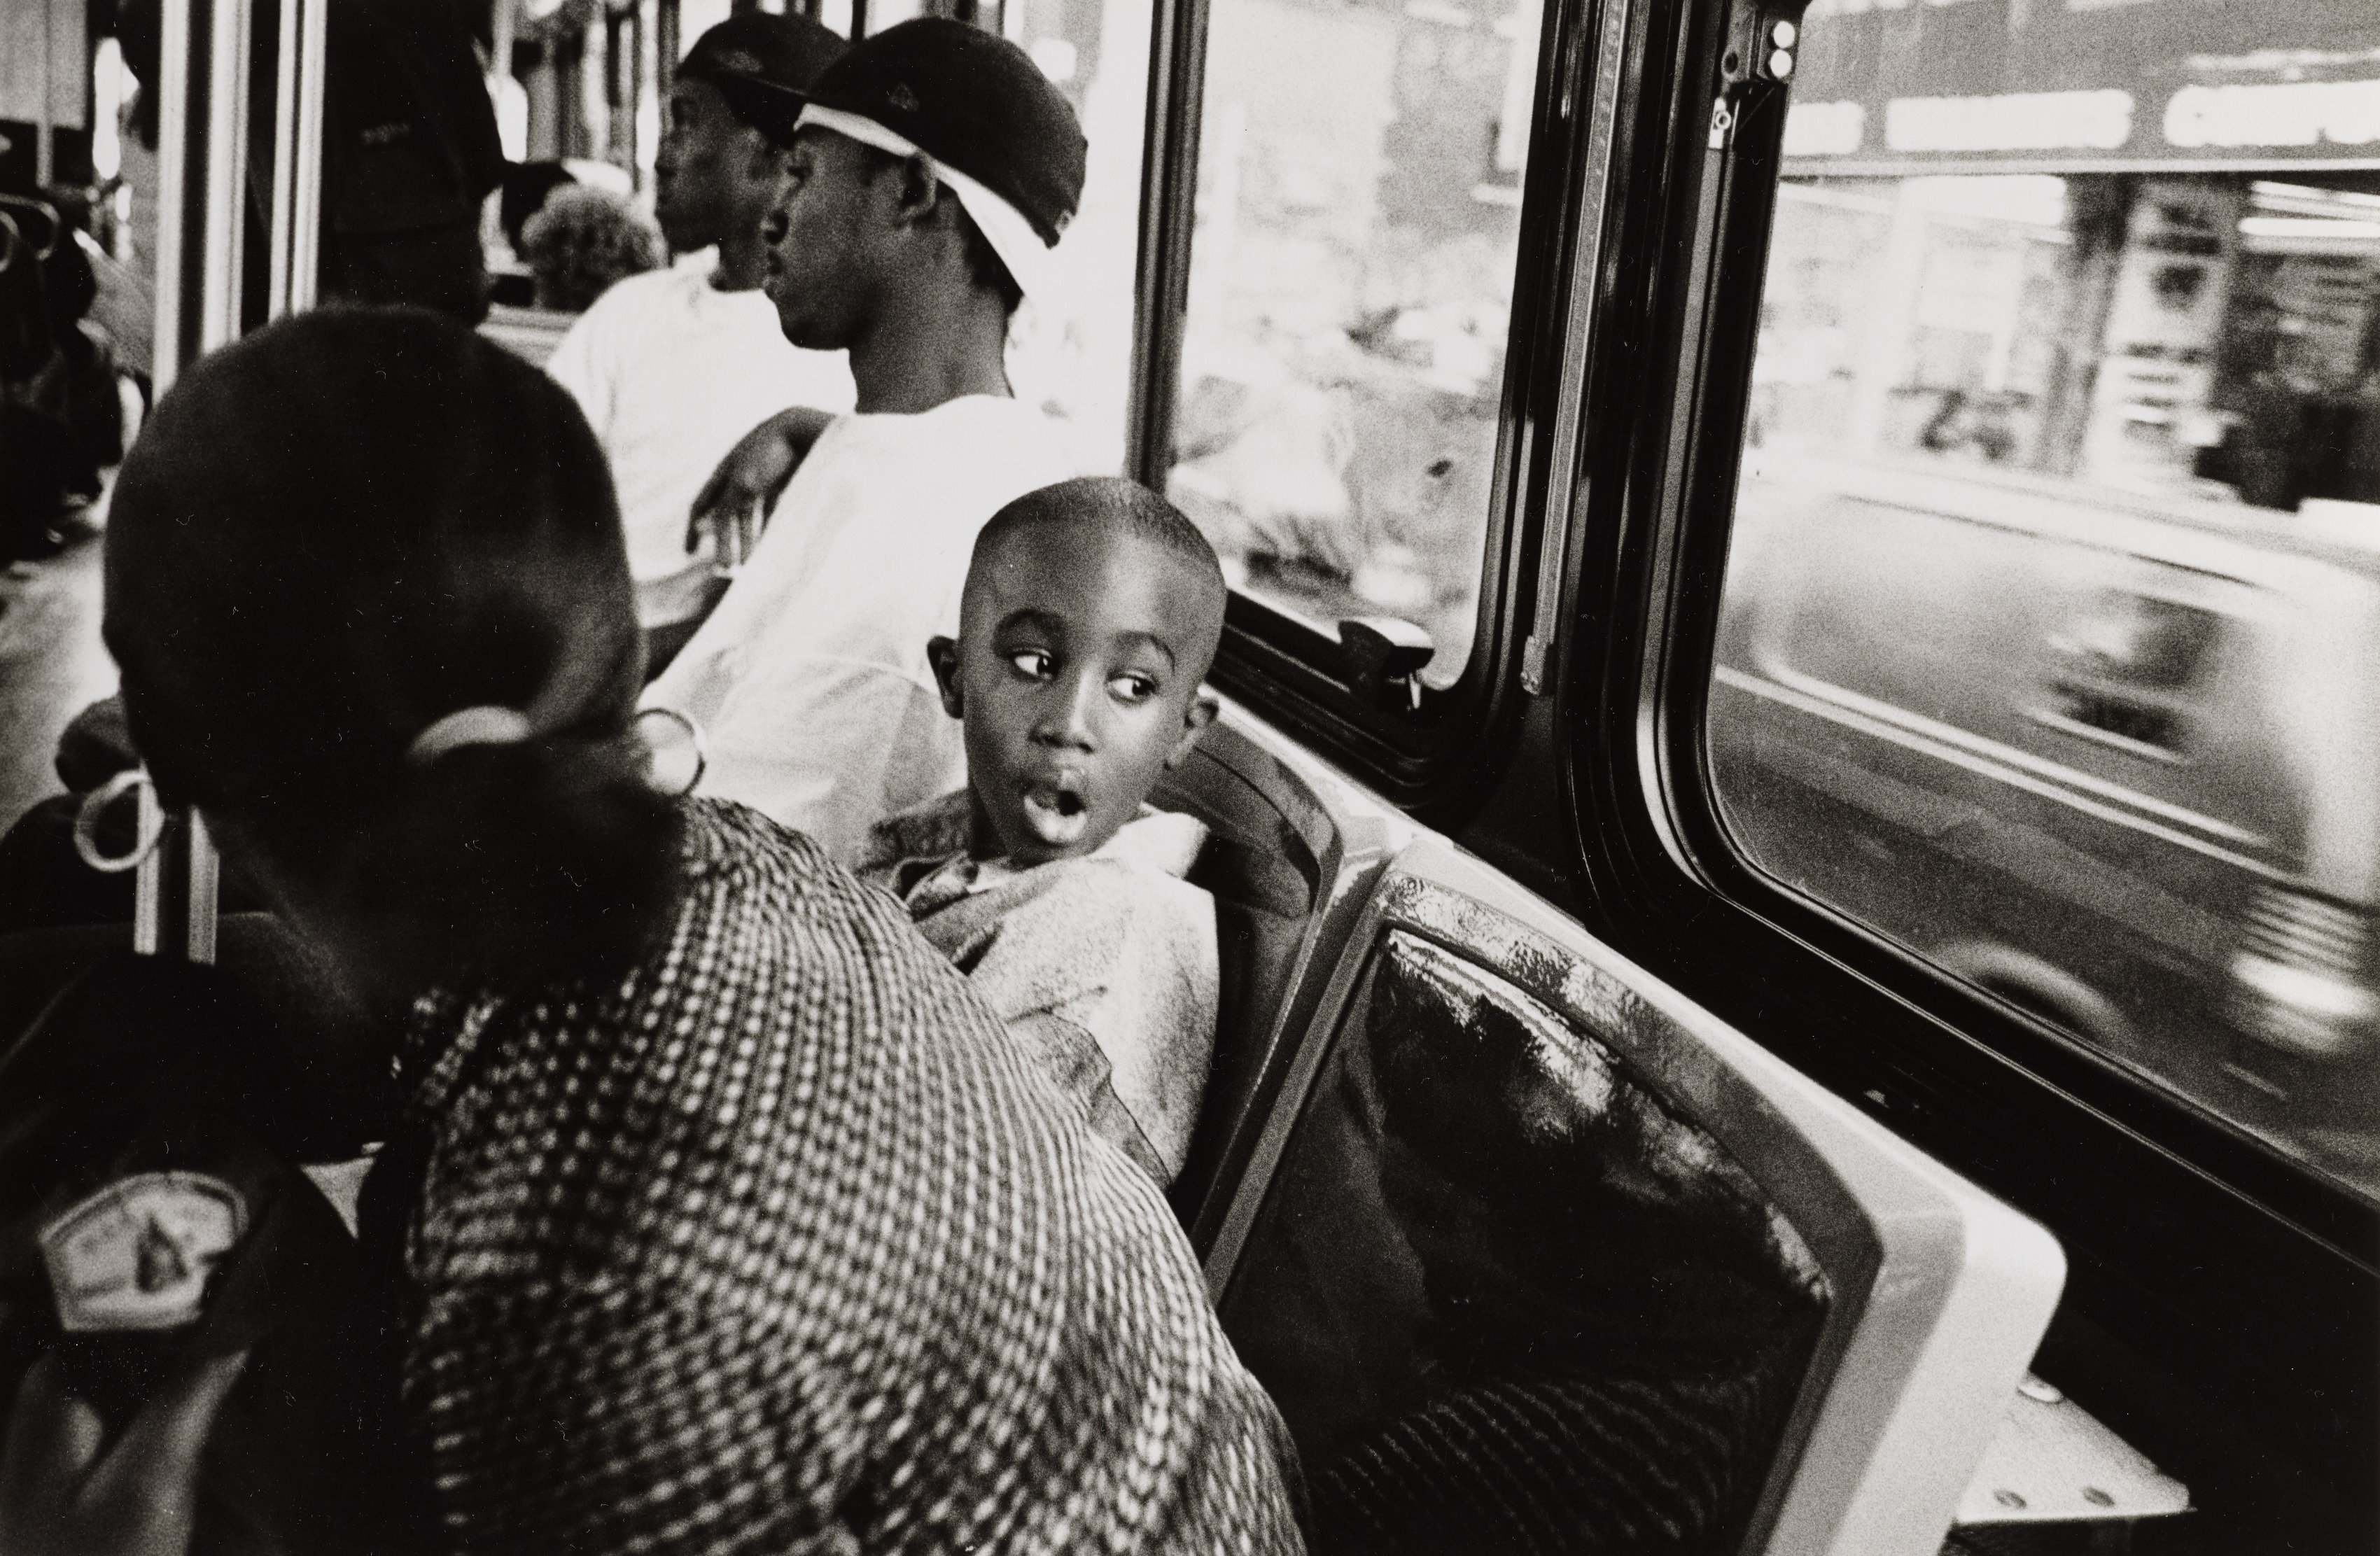 Boy Sitting on Bus Looking Out the Window, Bronx, New York City